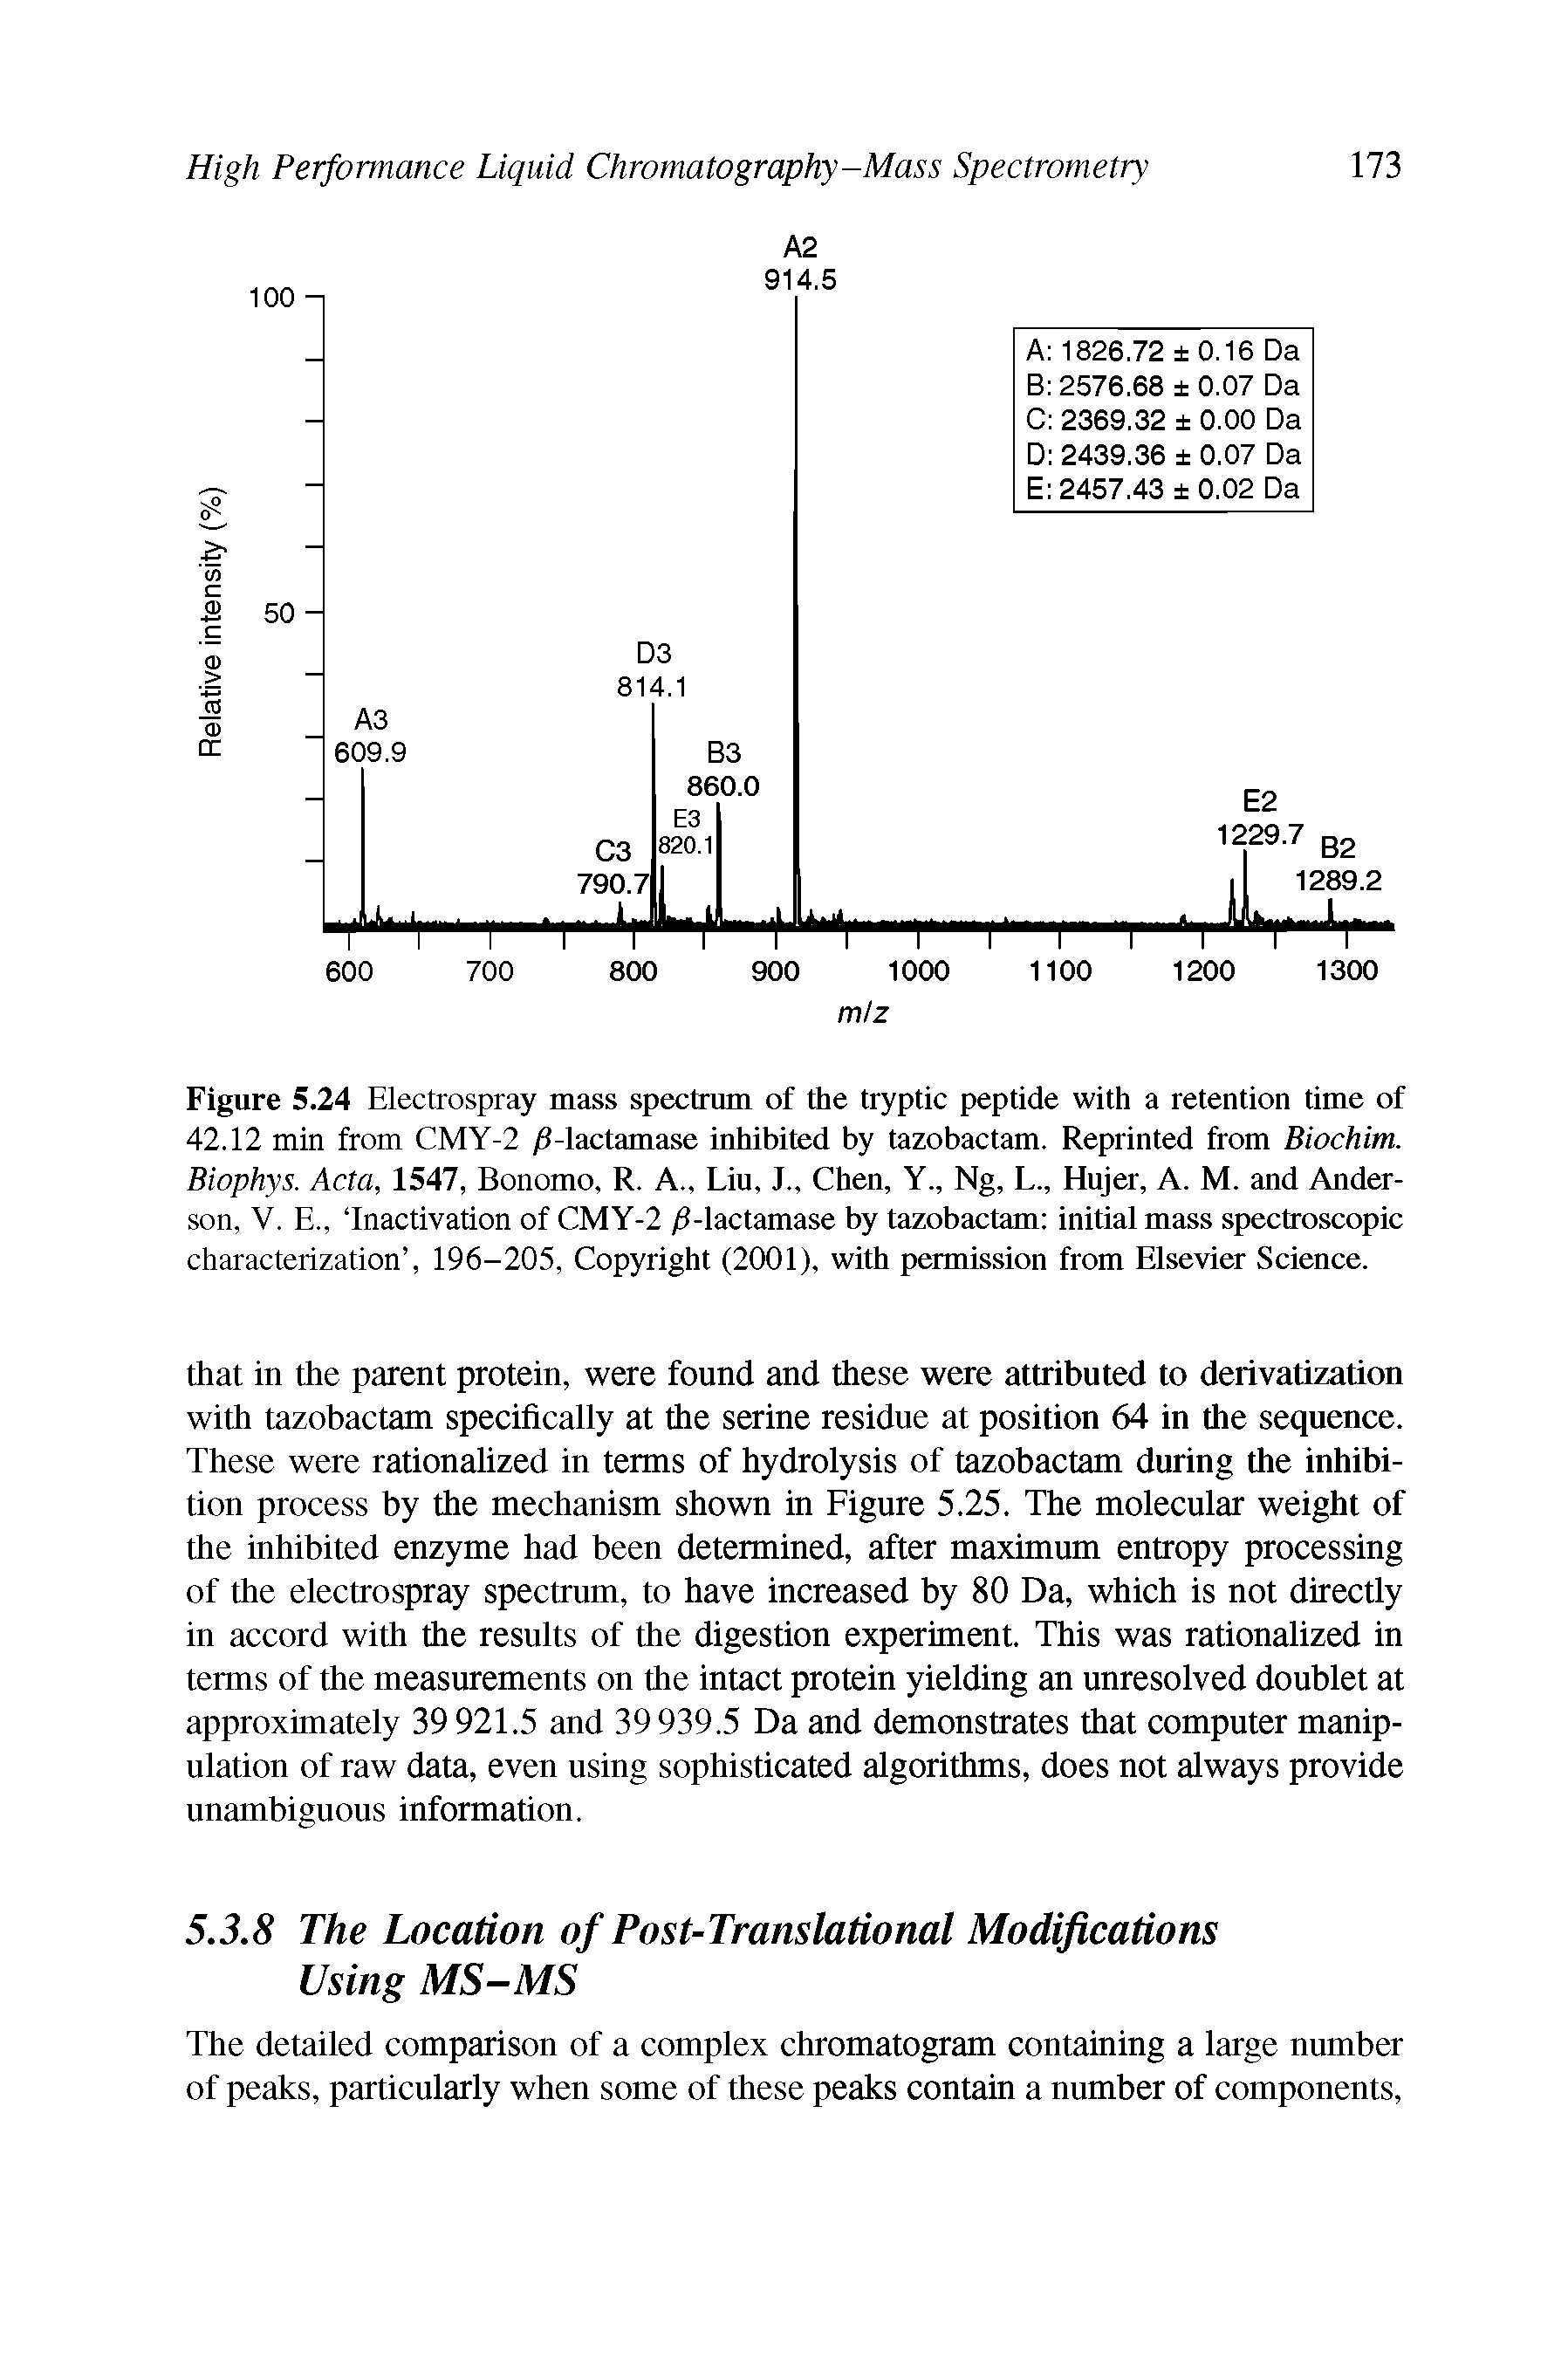 Figure 5.24 Electrospray mass spectrum of the tryptic peptide with a retention time of 42.12 min from CMY-2 S-lactamase inhibited by tazobactam. Reprinted from Biochim. Biophys. Acta, 1547, Bonomo, R. A., Liu, J., Chen, Y., Ng, L., Hujer, A. M. and Anderson, V. E., Inactivation of CMY-2 /1-lactamase by tazobactam initial mass spectroscopic characterization , 196-205, Copyright (2001), with permission from Elsevier Science.